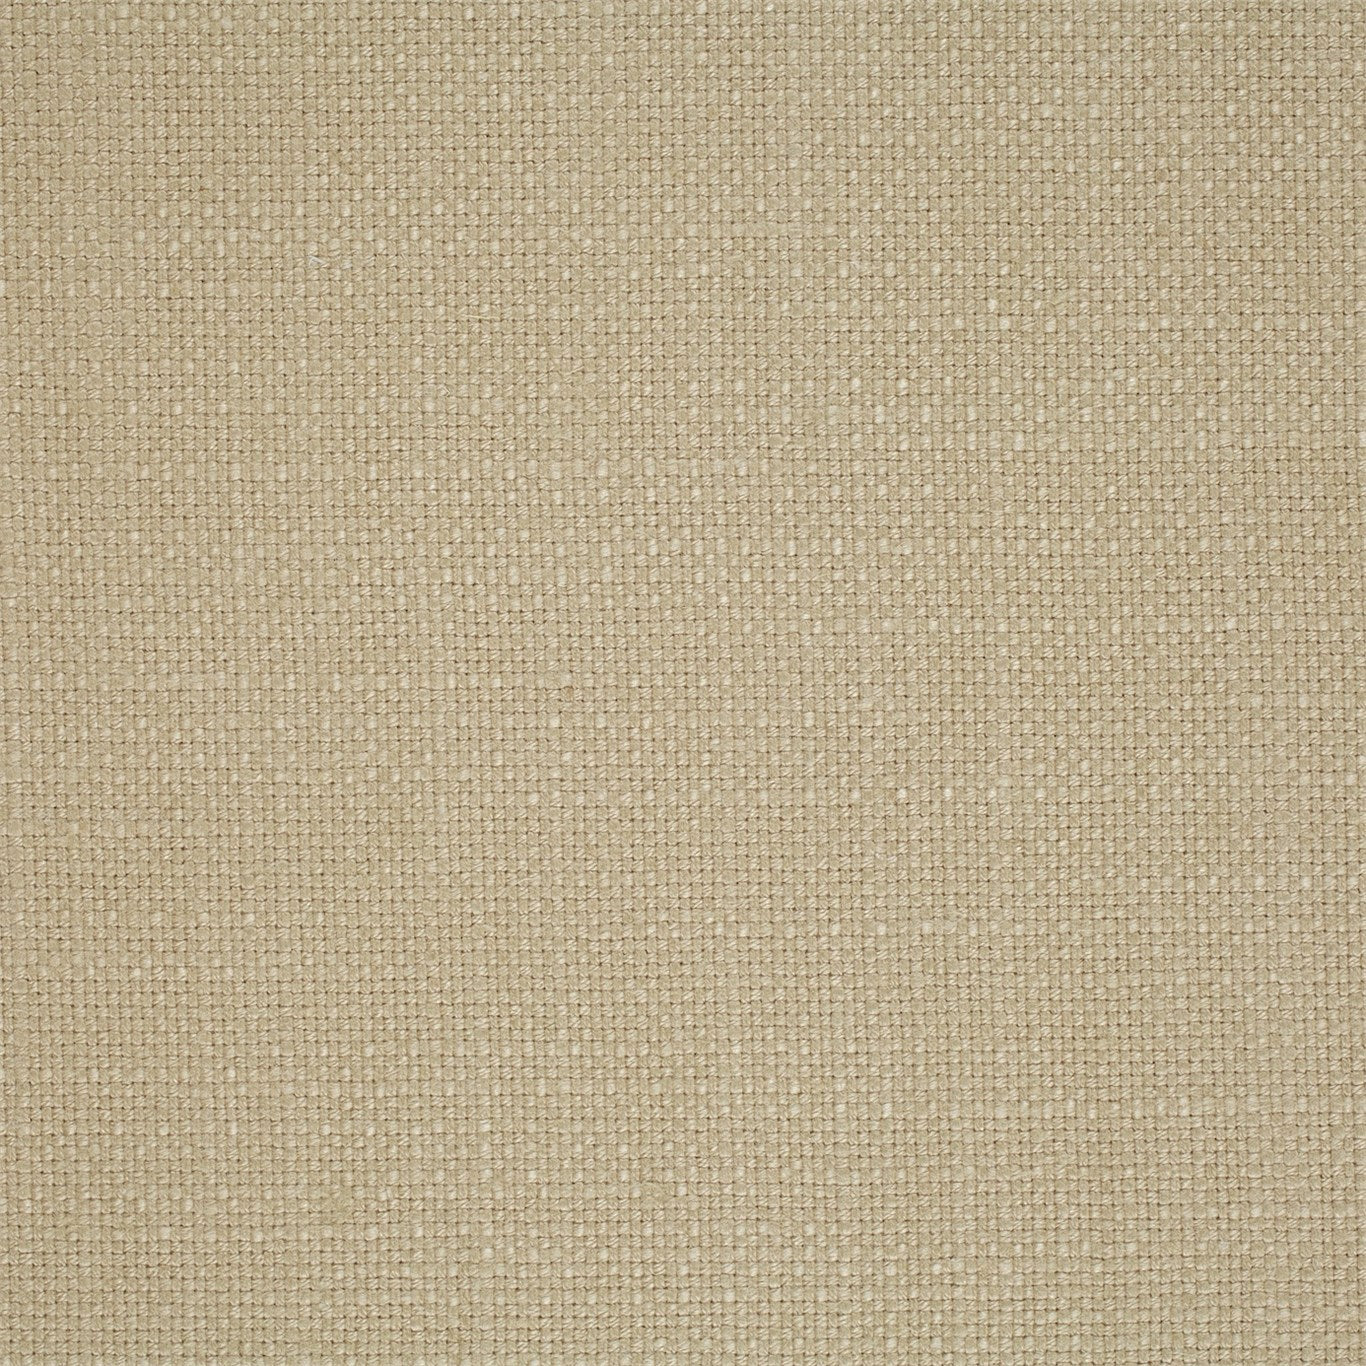 Tuscany Fabric by Sanderson Home